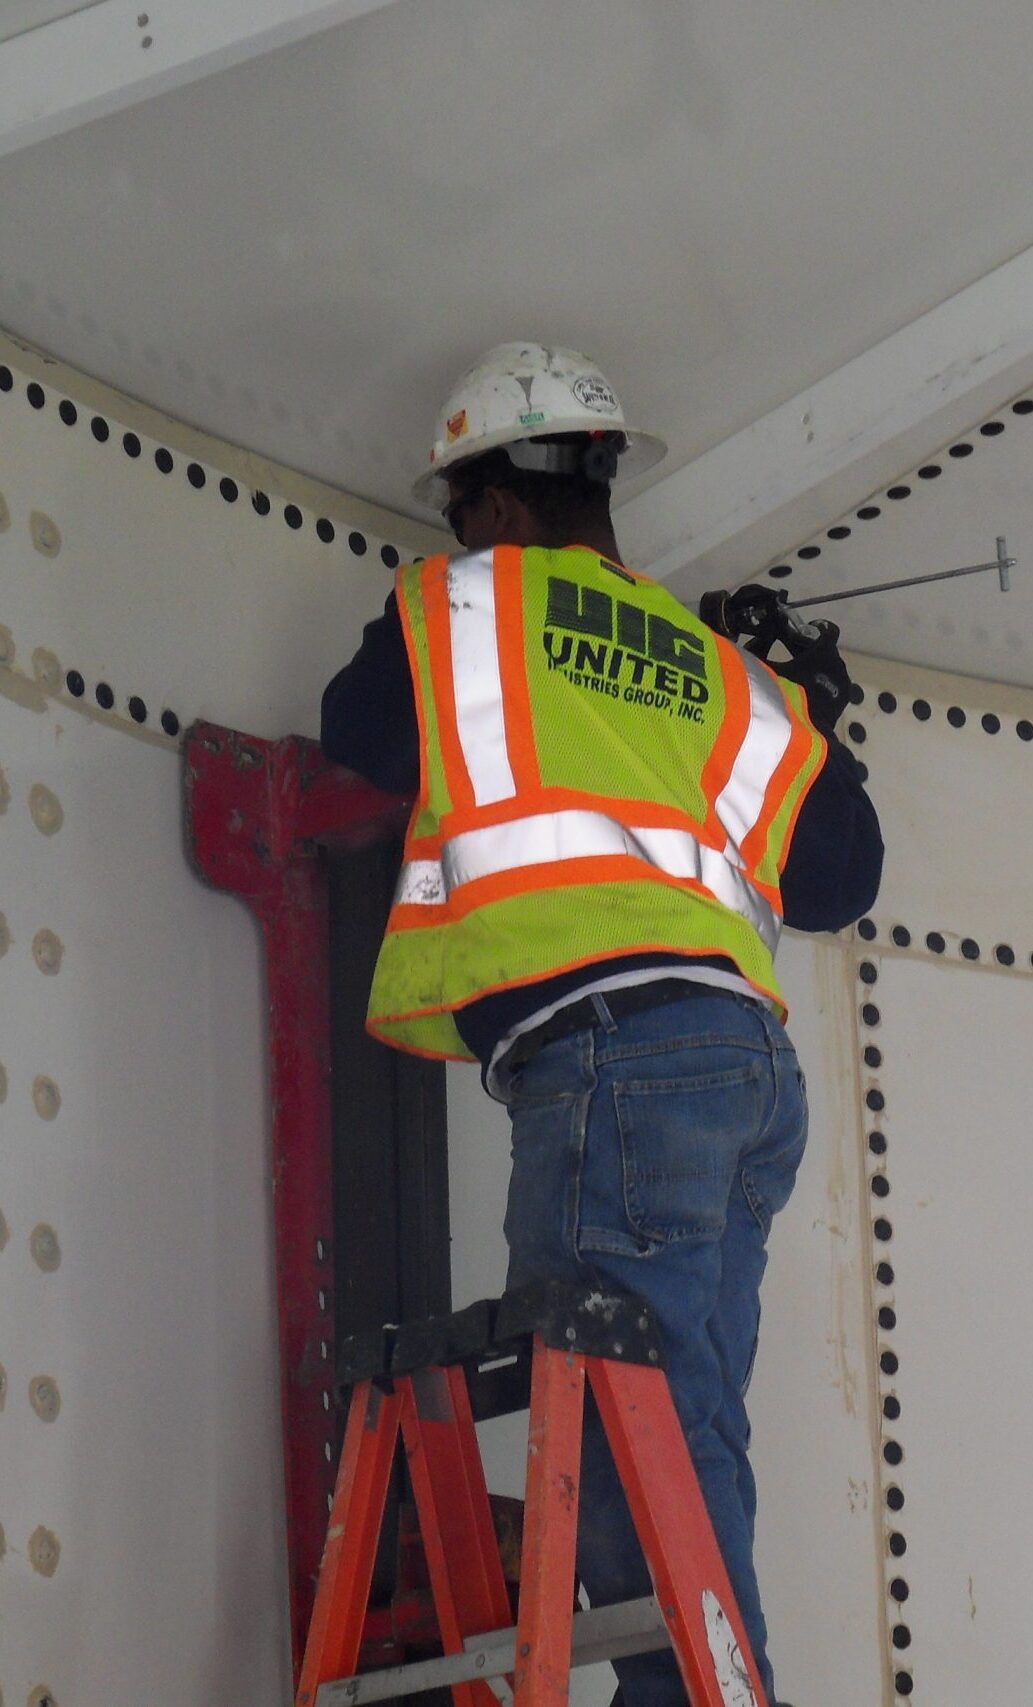 Worker on a ladder applying sealant to panels on a bolted tank